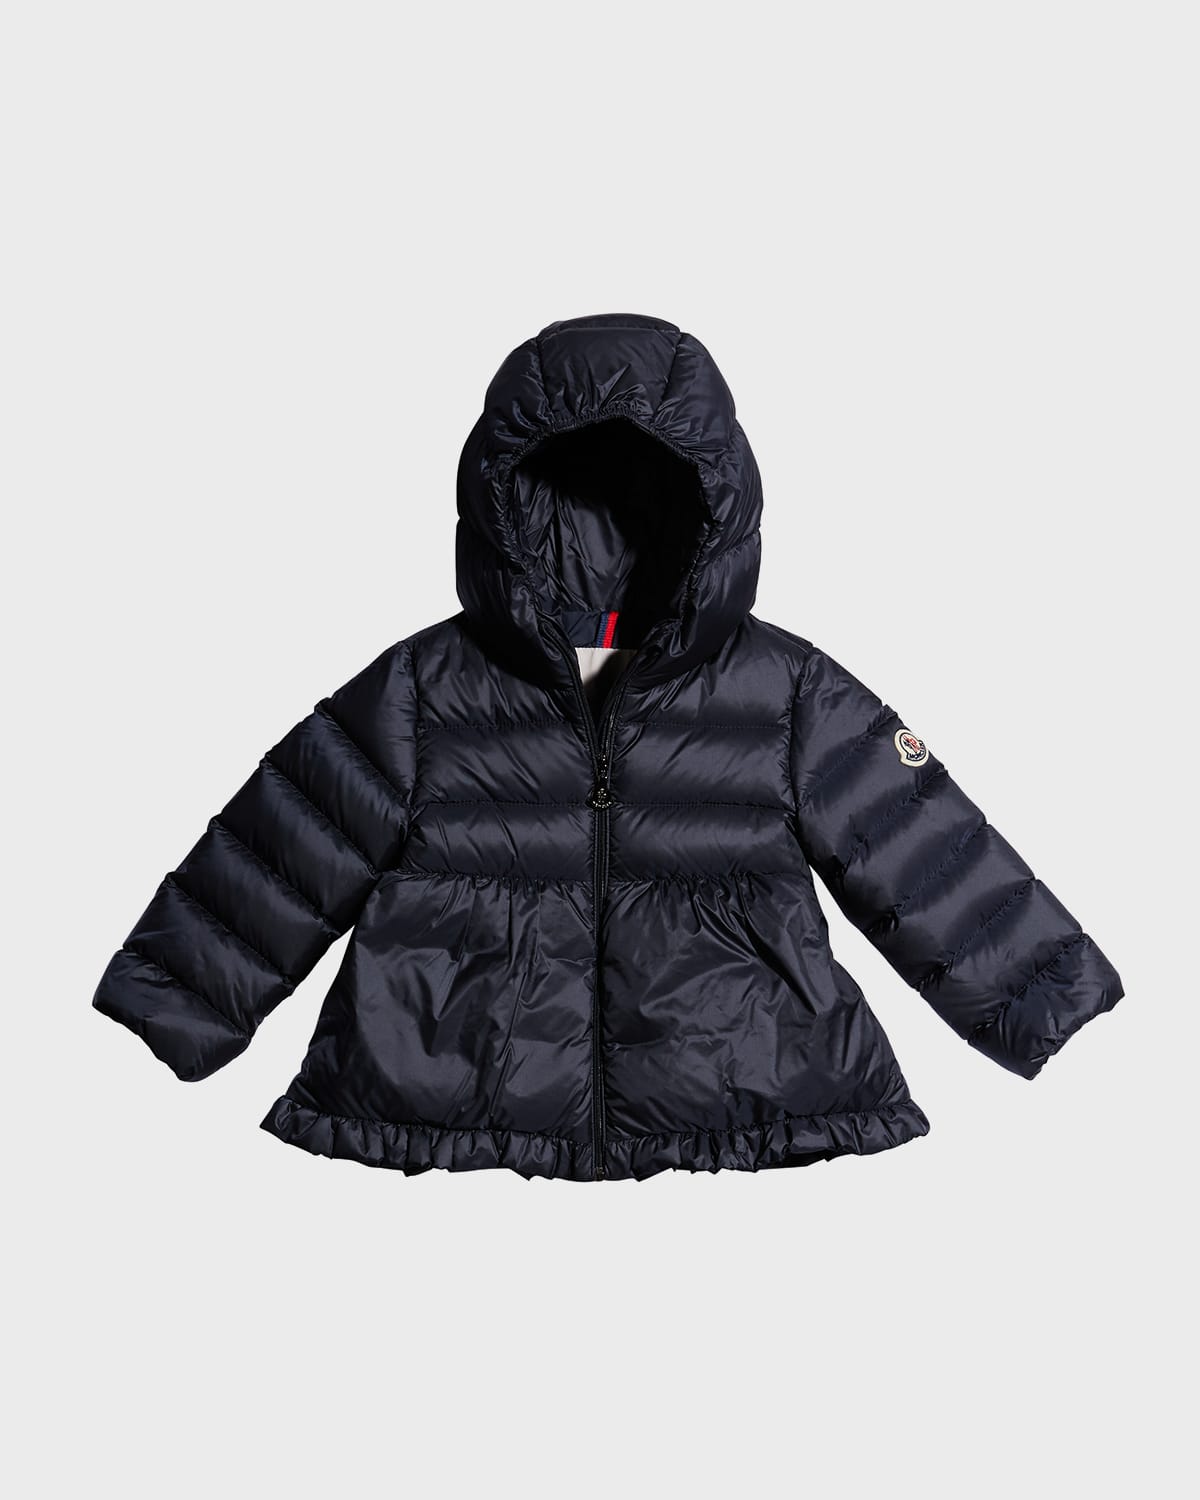 MONCLER GIRL'S ODILE QUILTED RUFFLE JACKET